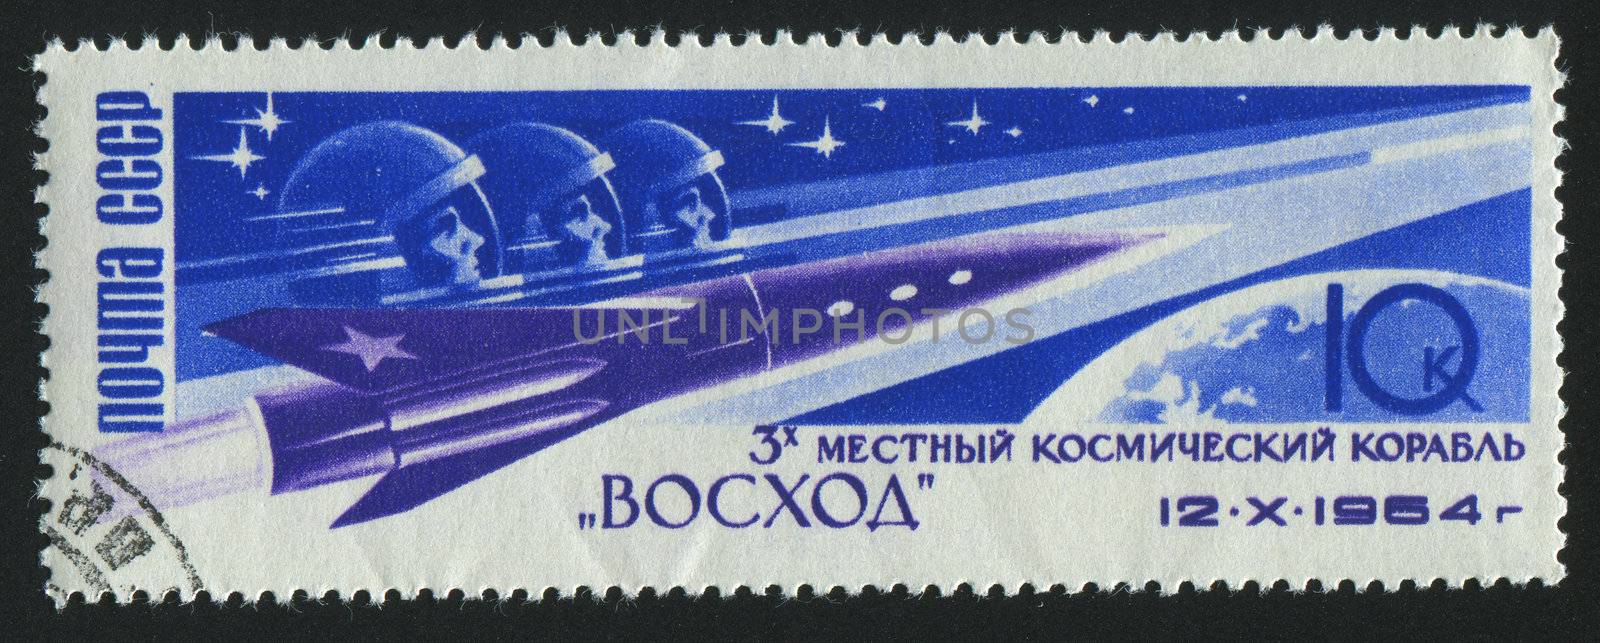 RUSSIA - CIRCA 1964: stamp printed by Russia, shows planet and astronaut,  circa 1964.